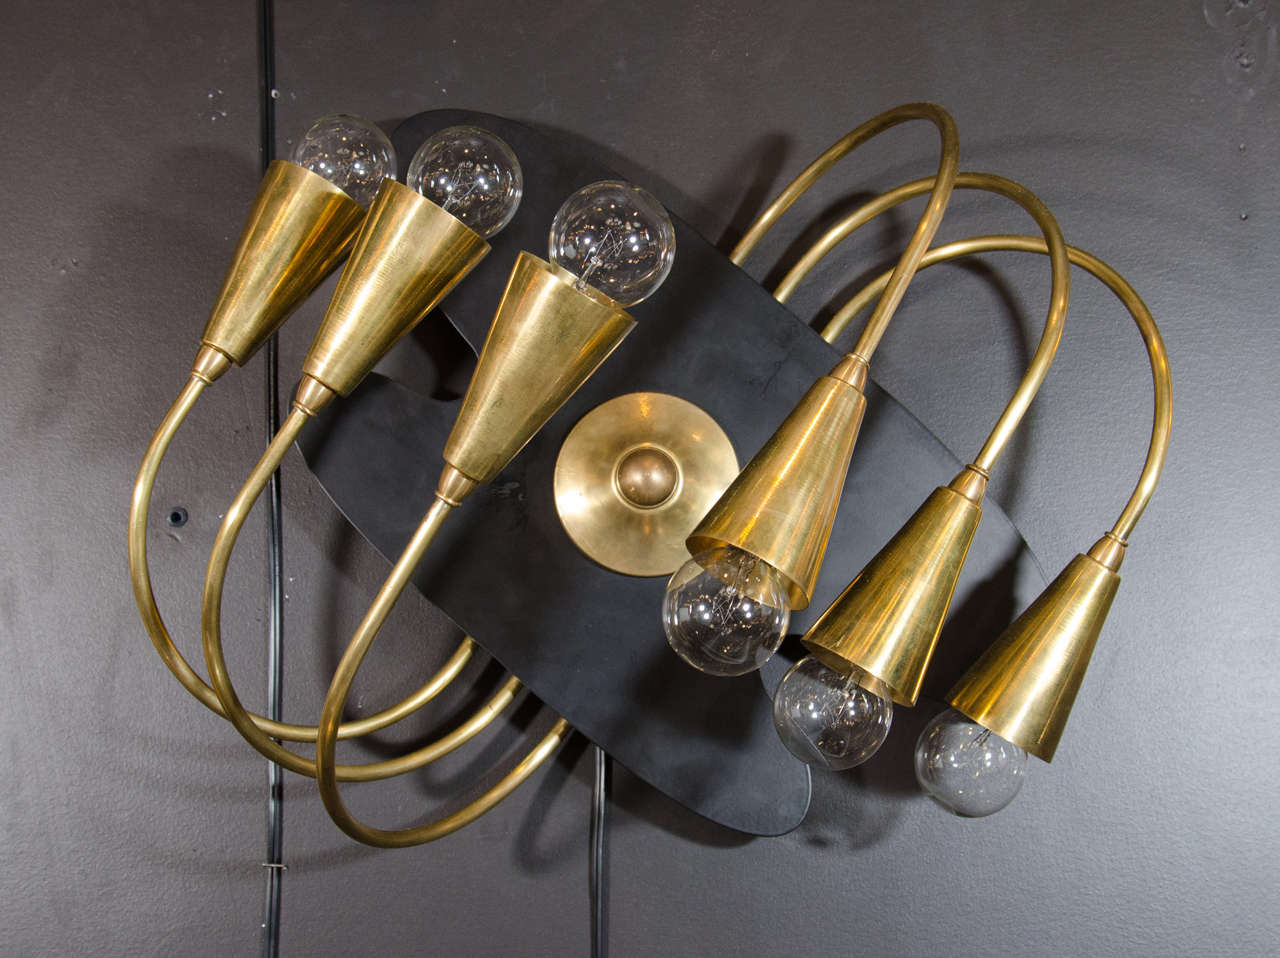 Spectacular pair of rare sculptural brass sconces. The lights feature a six arm modern asymmetrical scrolled design with an amorphous shaped wall-mounted backplate in a black enameled metal. Highly stylized form that also function as wall sculptures.